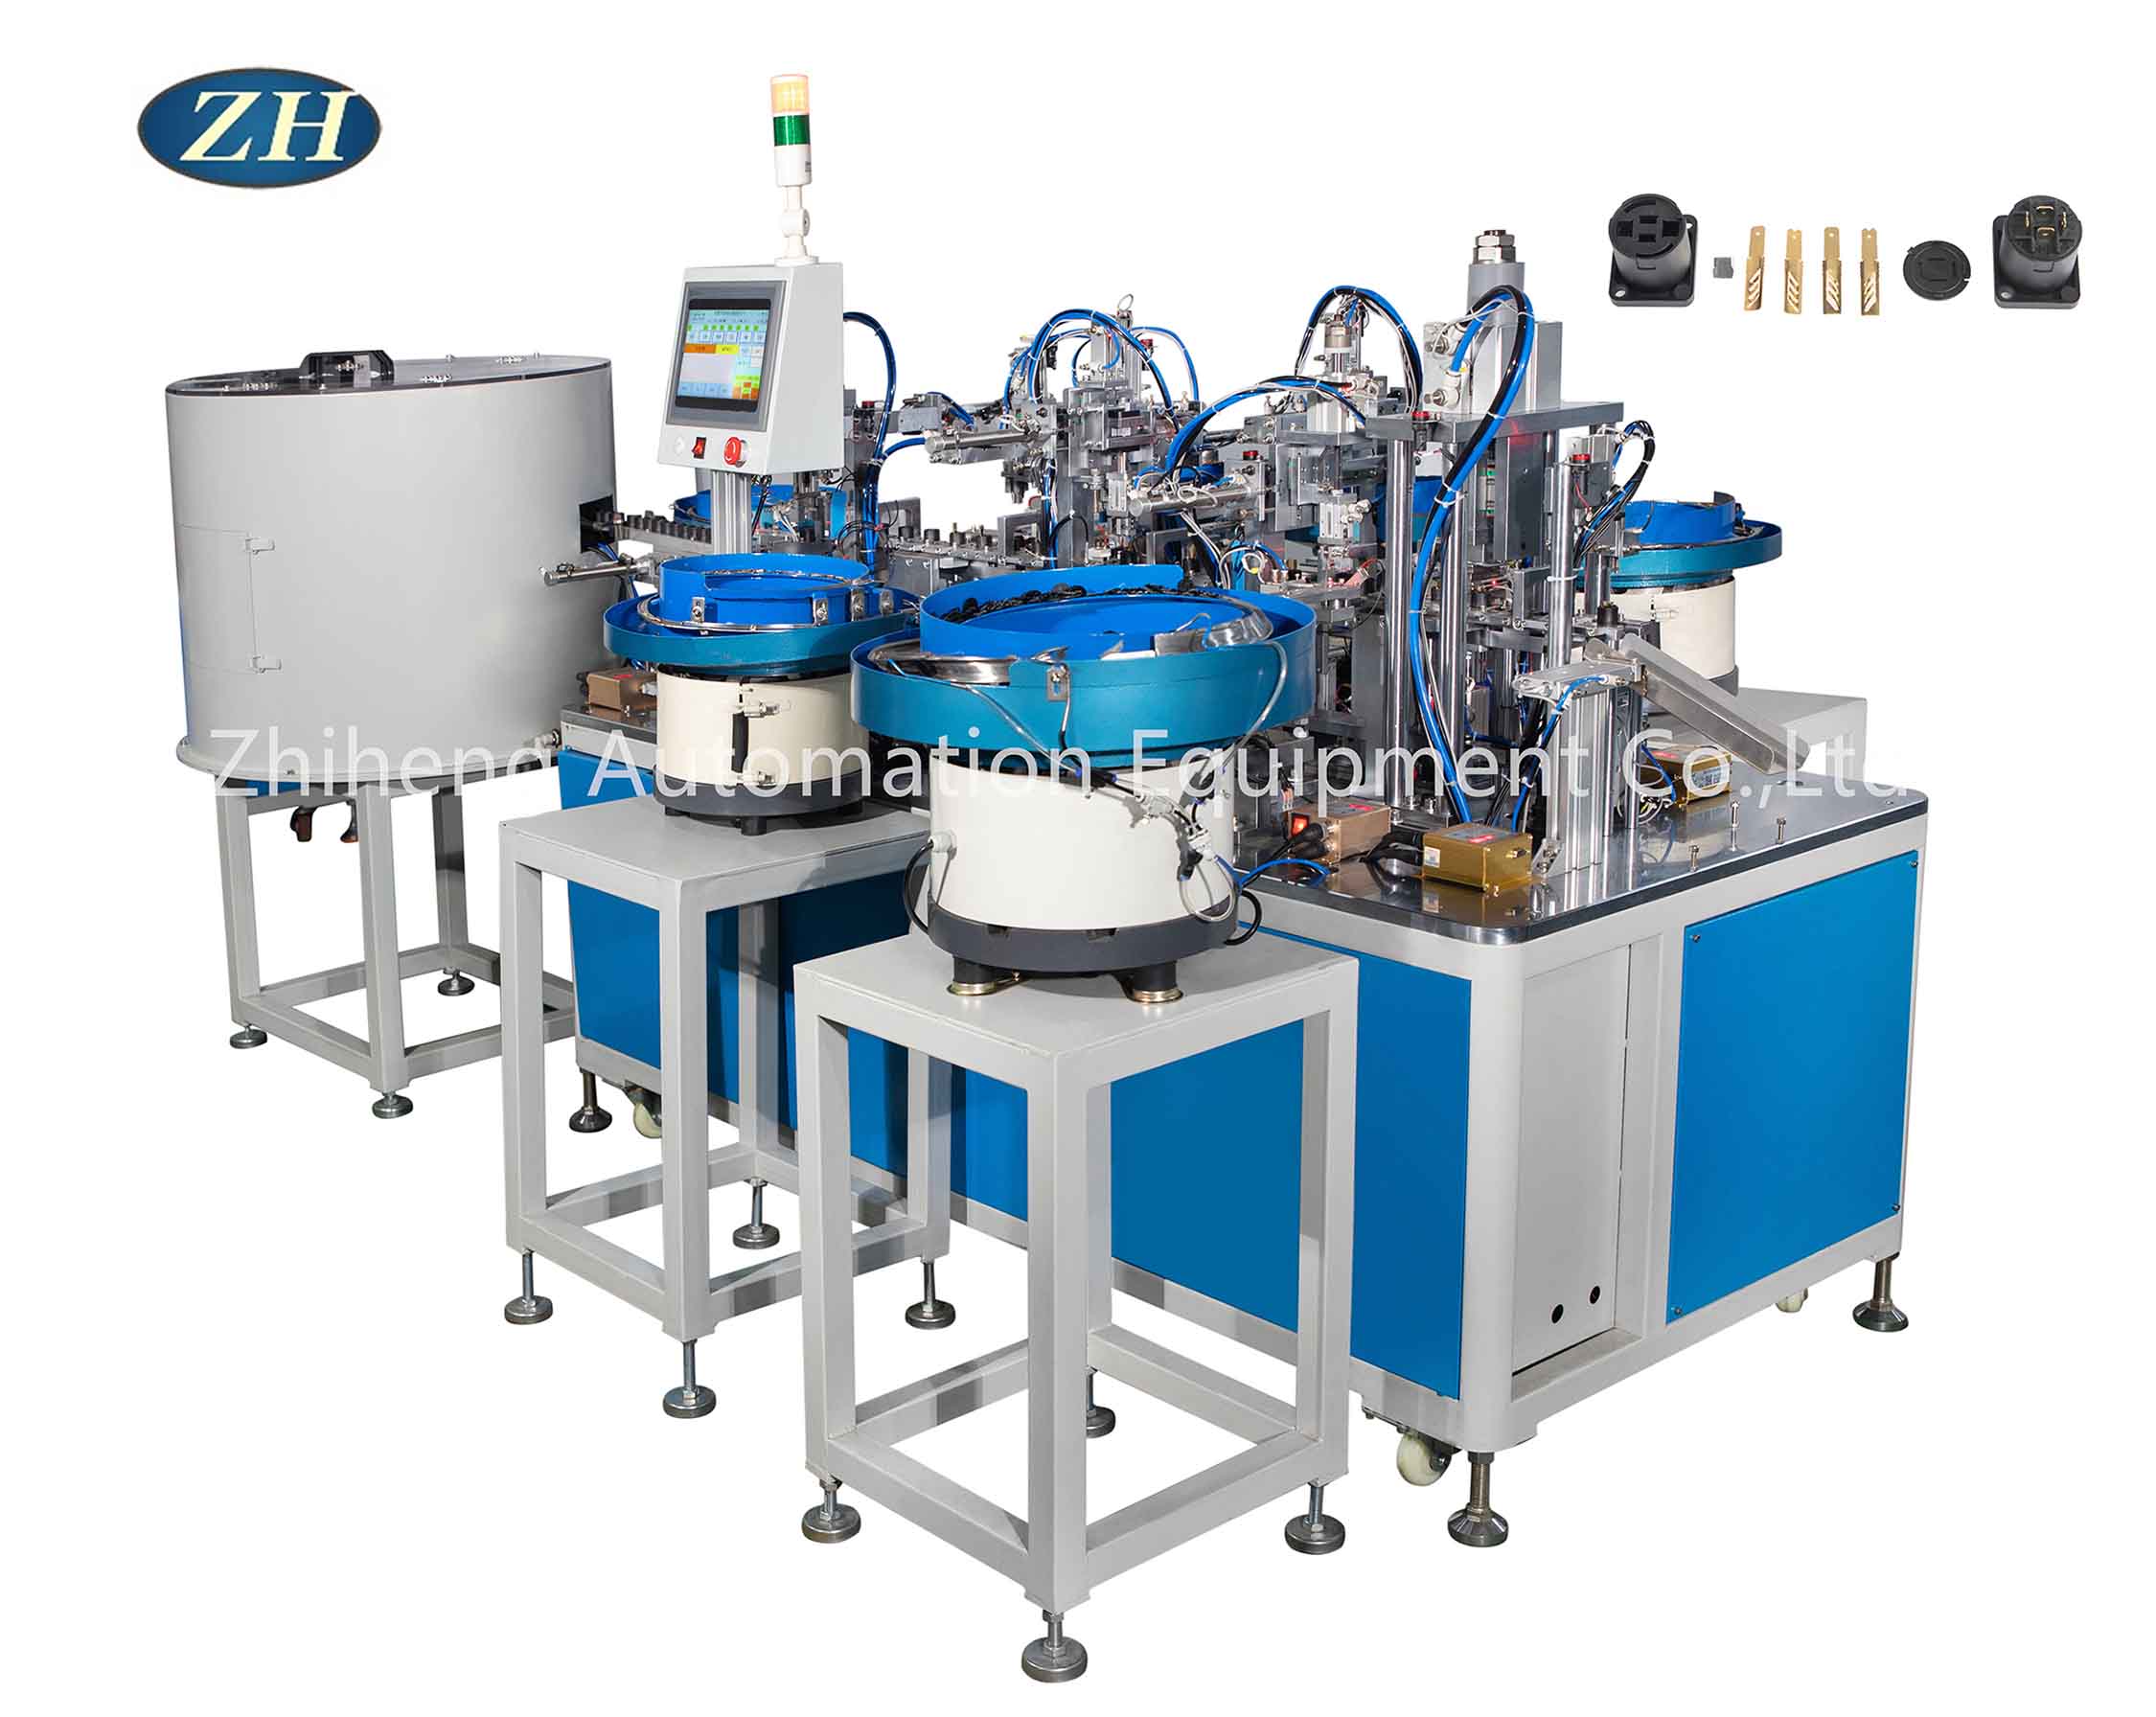  Automatic Assembly Machine for Connector Plug